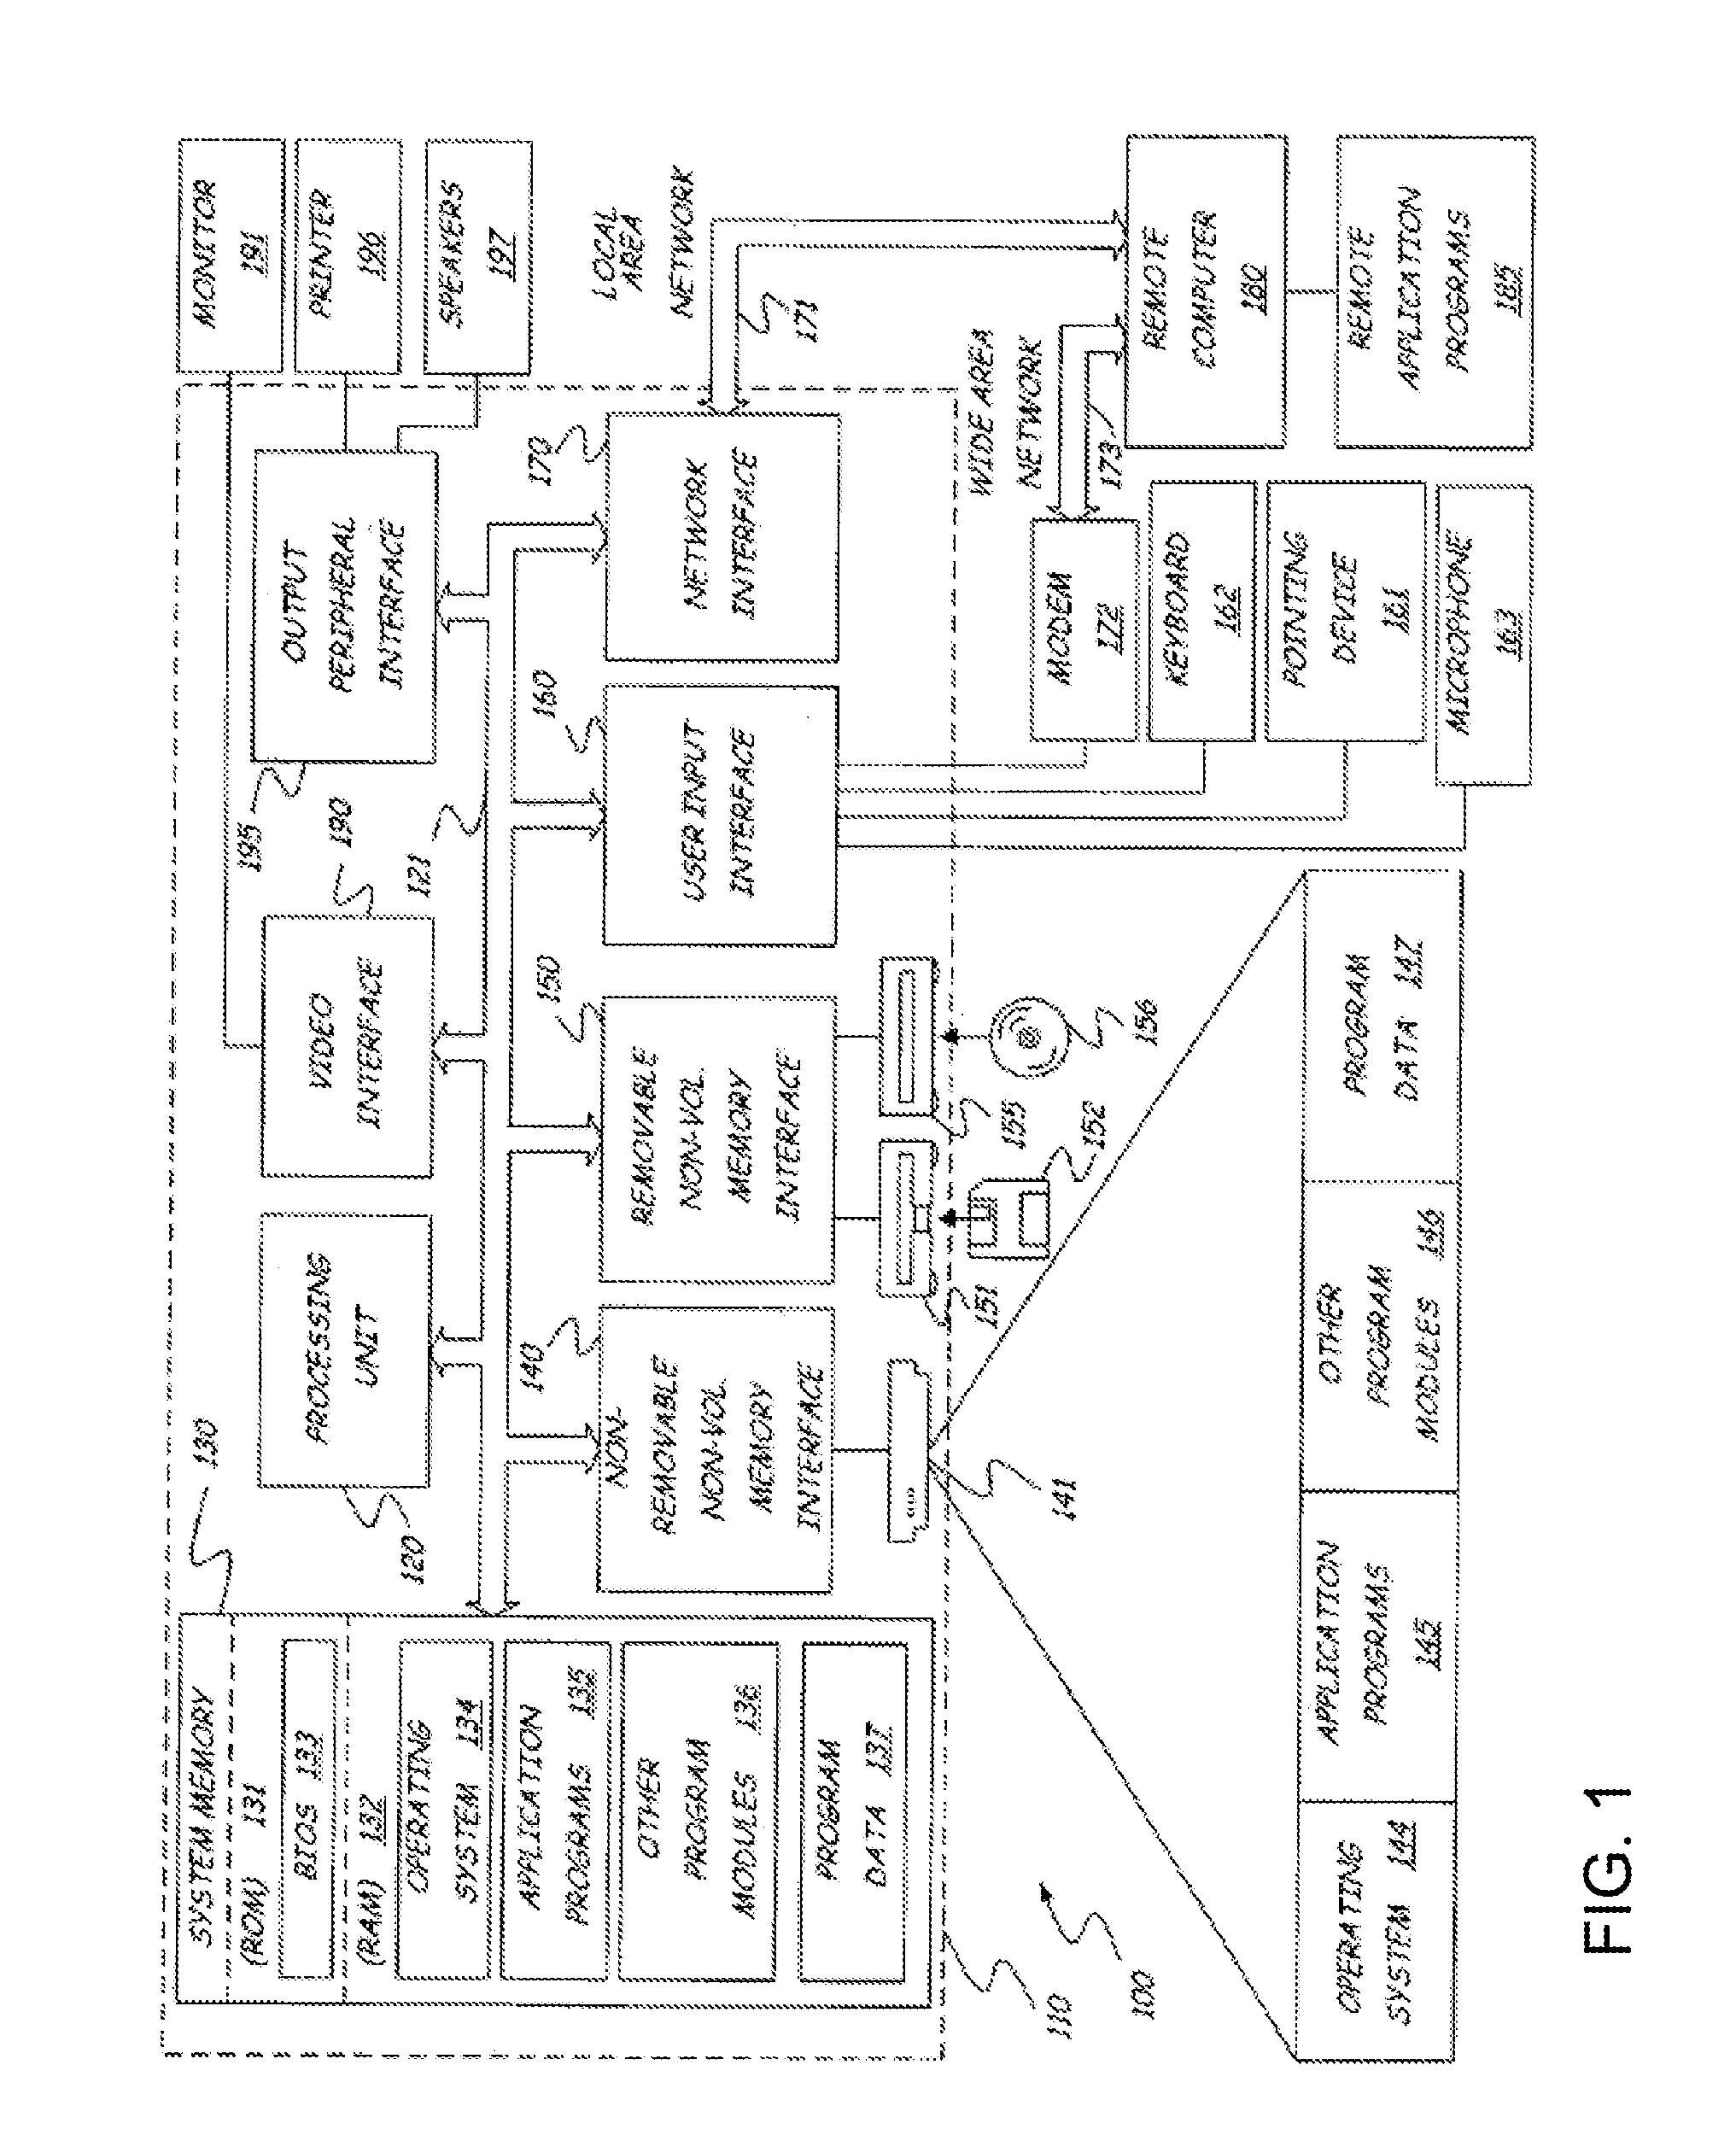 Method and system for statistical modeling of data using a quadratic likelihood functional